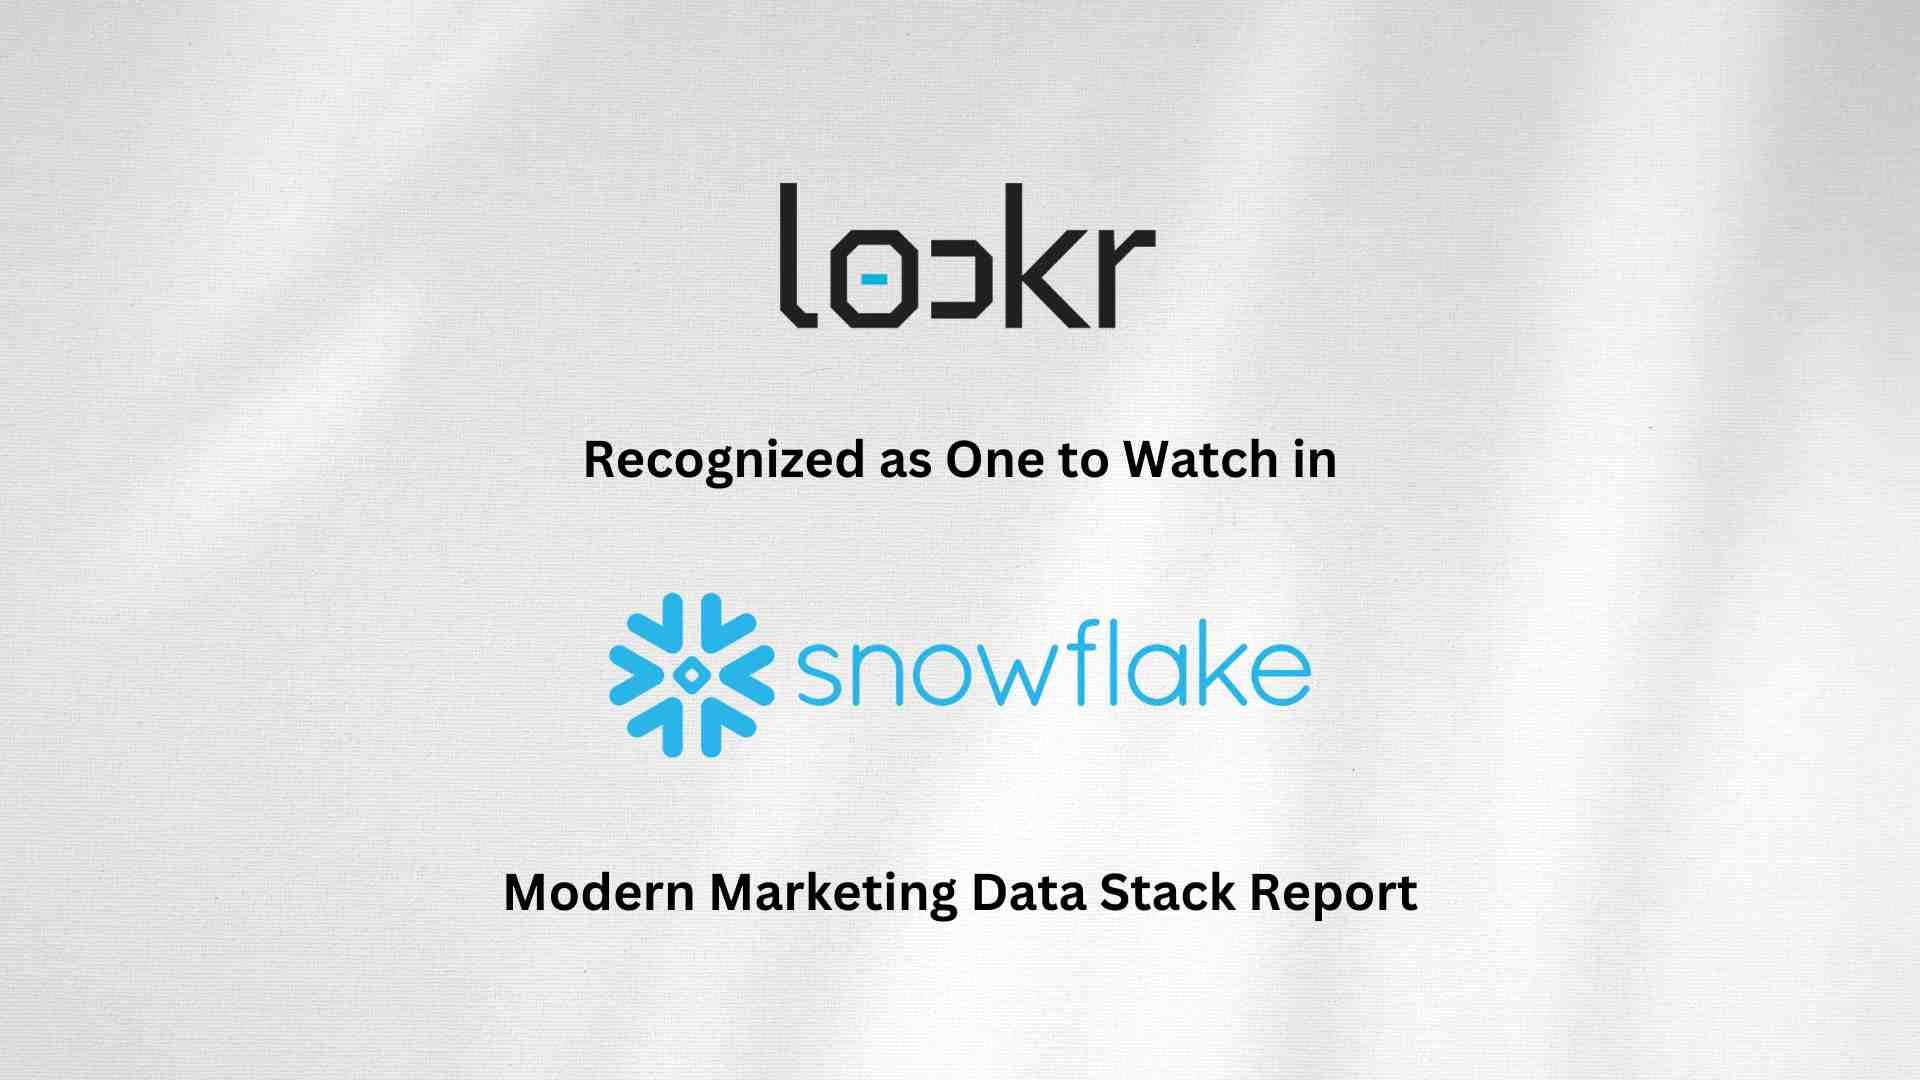 lockr Recognized as One to Watch in Snowflake's Modern Marketing Data Stack Report